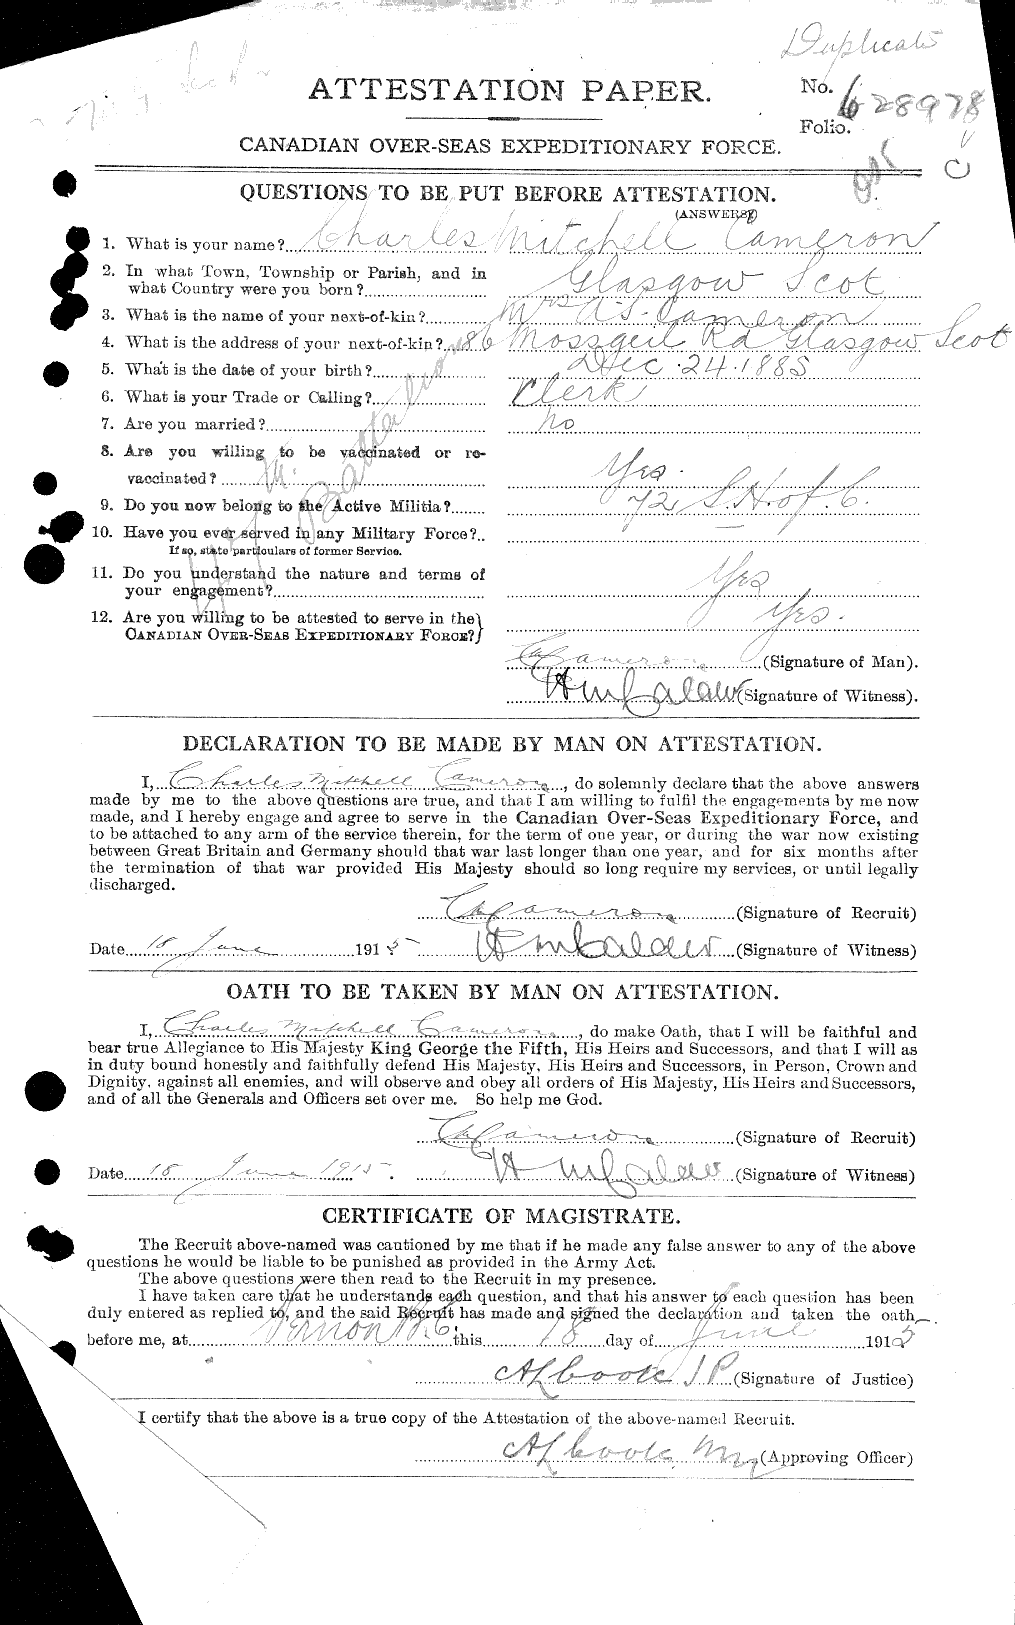 Personnel Records of the First World War - CEF 002615a